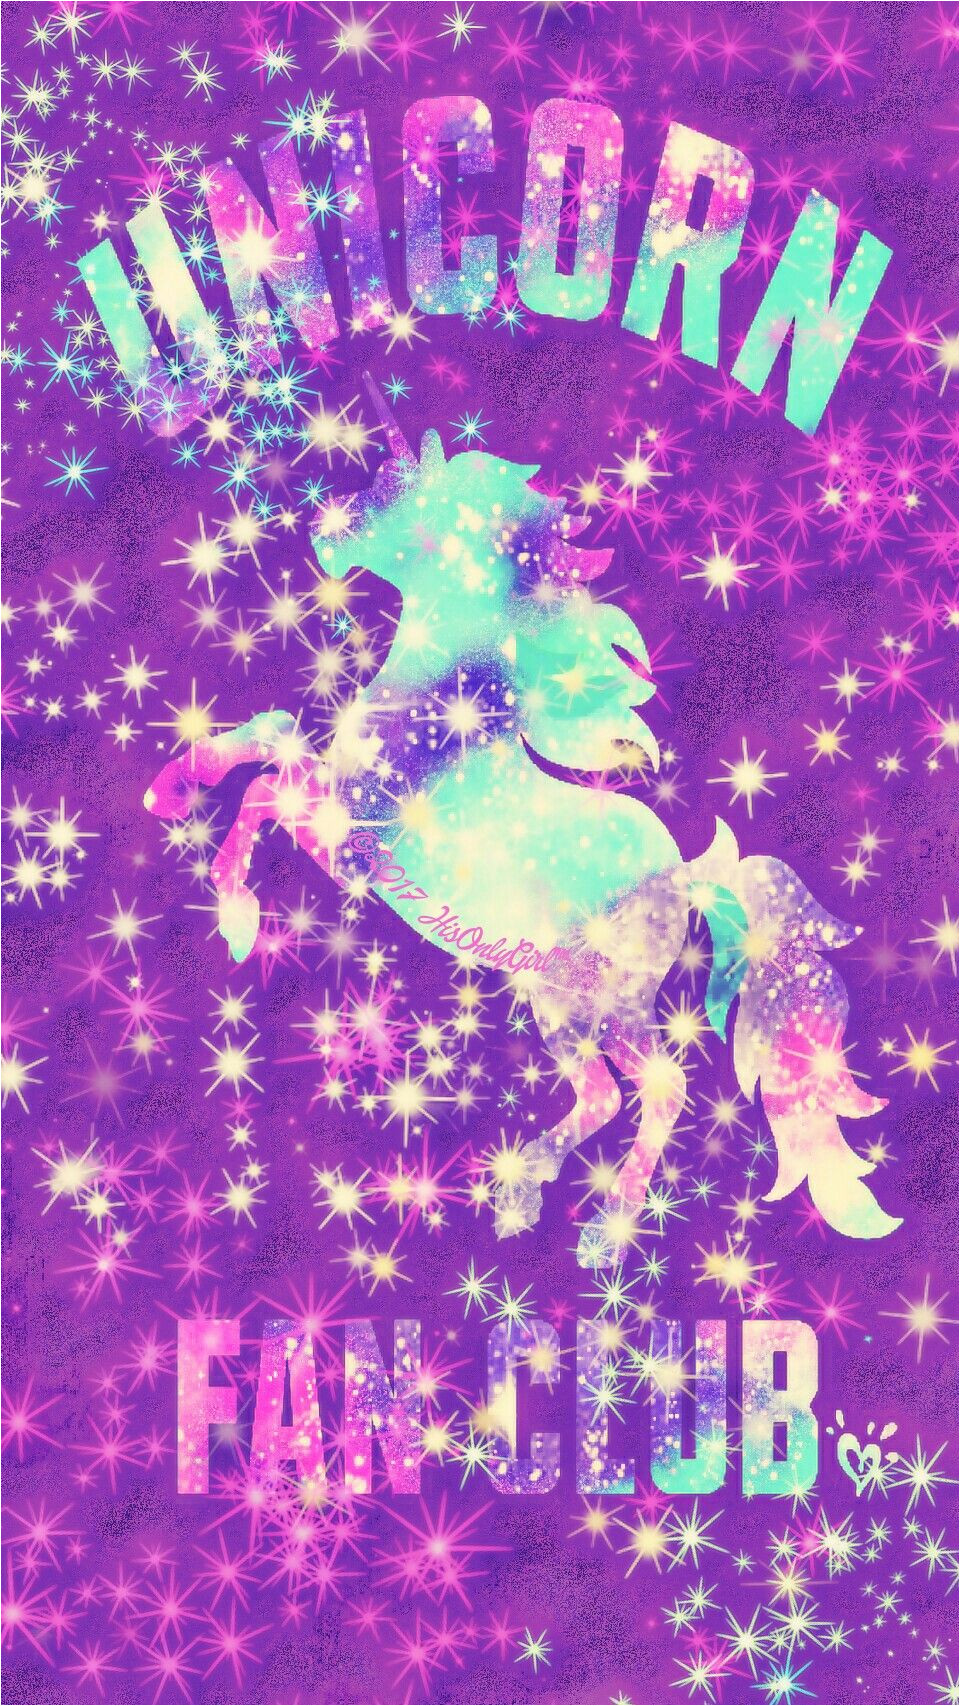 unicorn fan club sparkle galaxy iphone android wallpaper i created for the app cocoppa